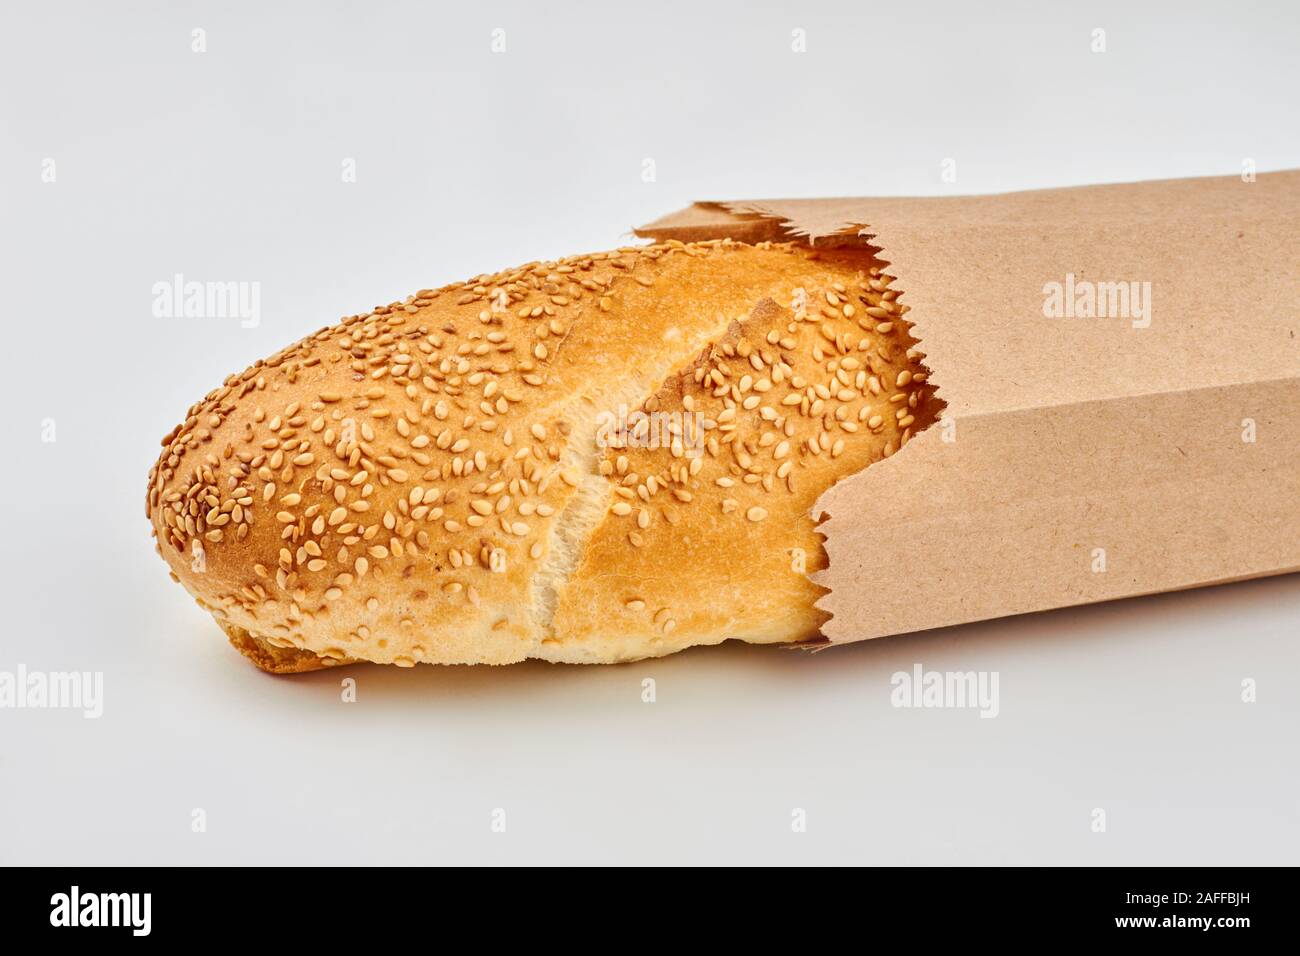 French bread baguette with sesame seeds. Stock Photo